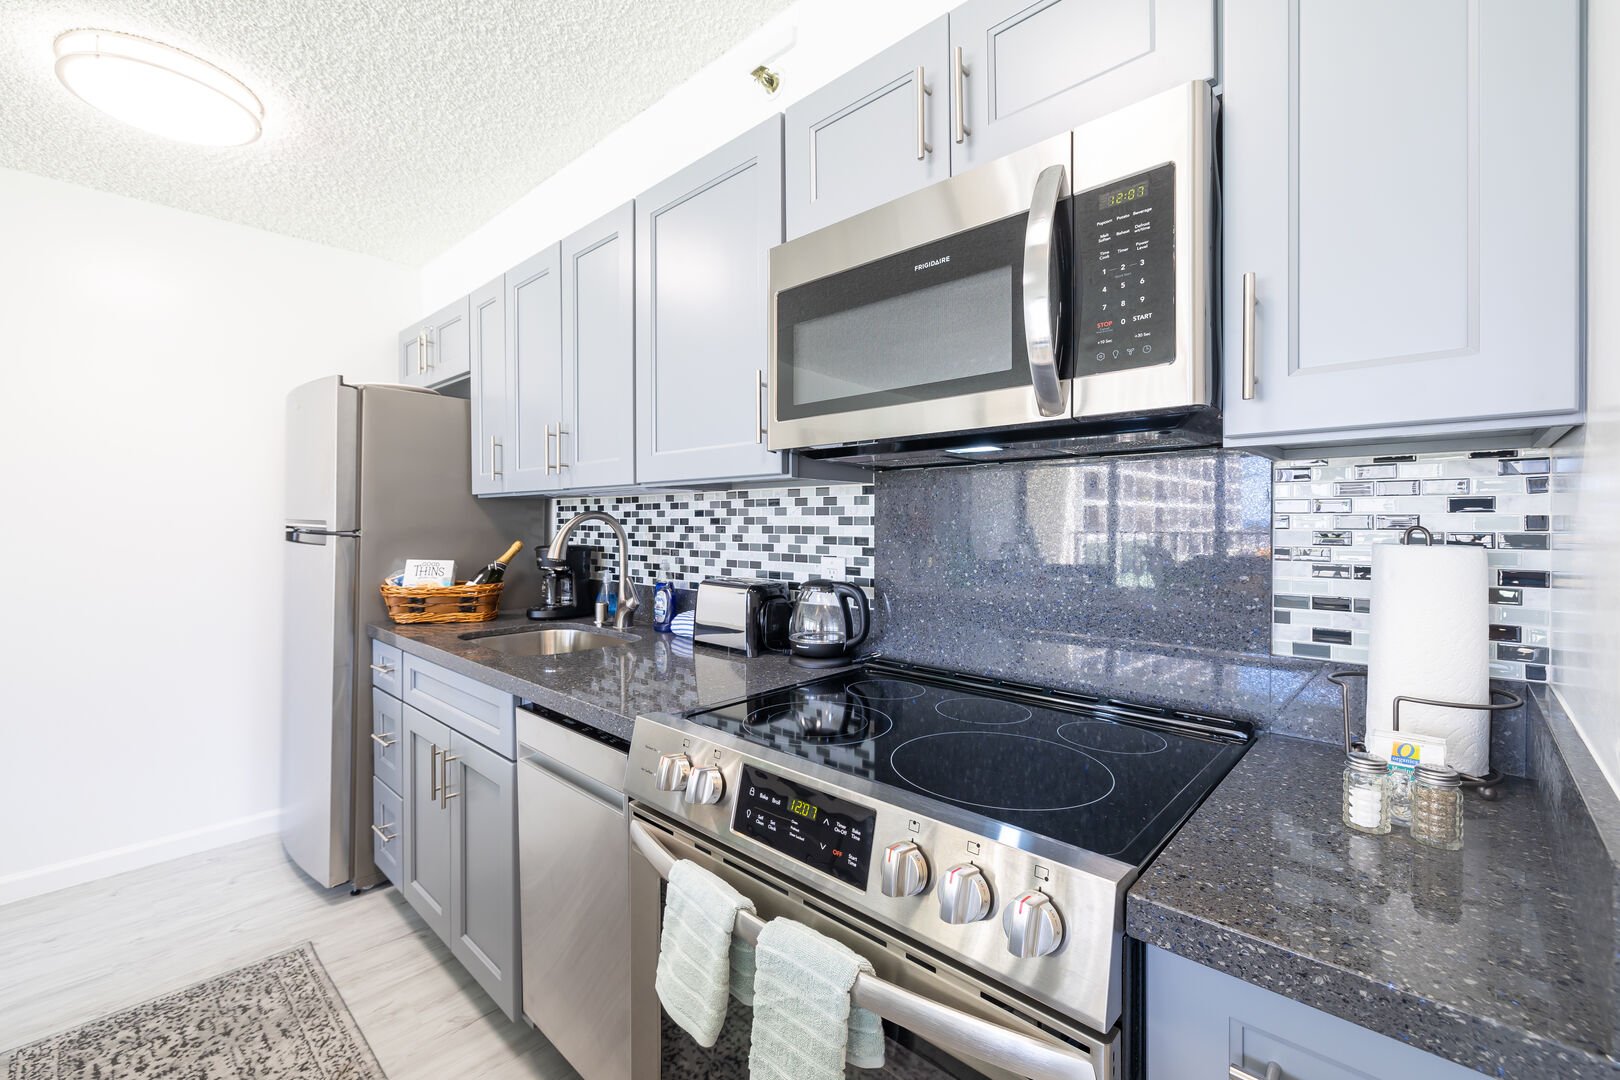 Fully equipped kitchen with stainless steel appliances and dishwasher